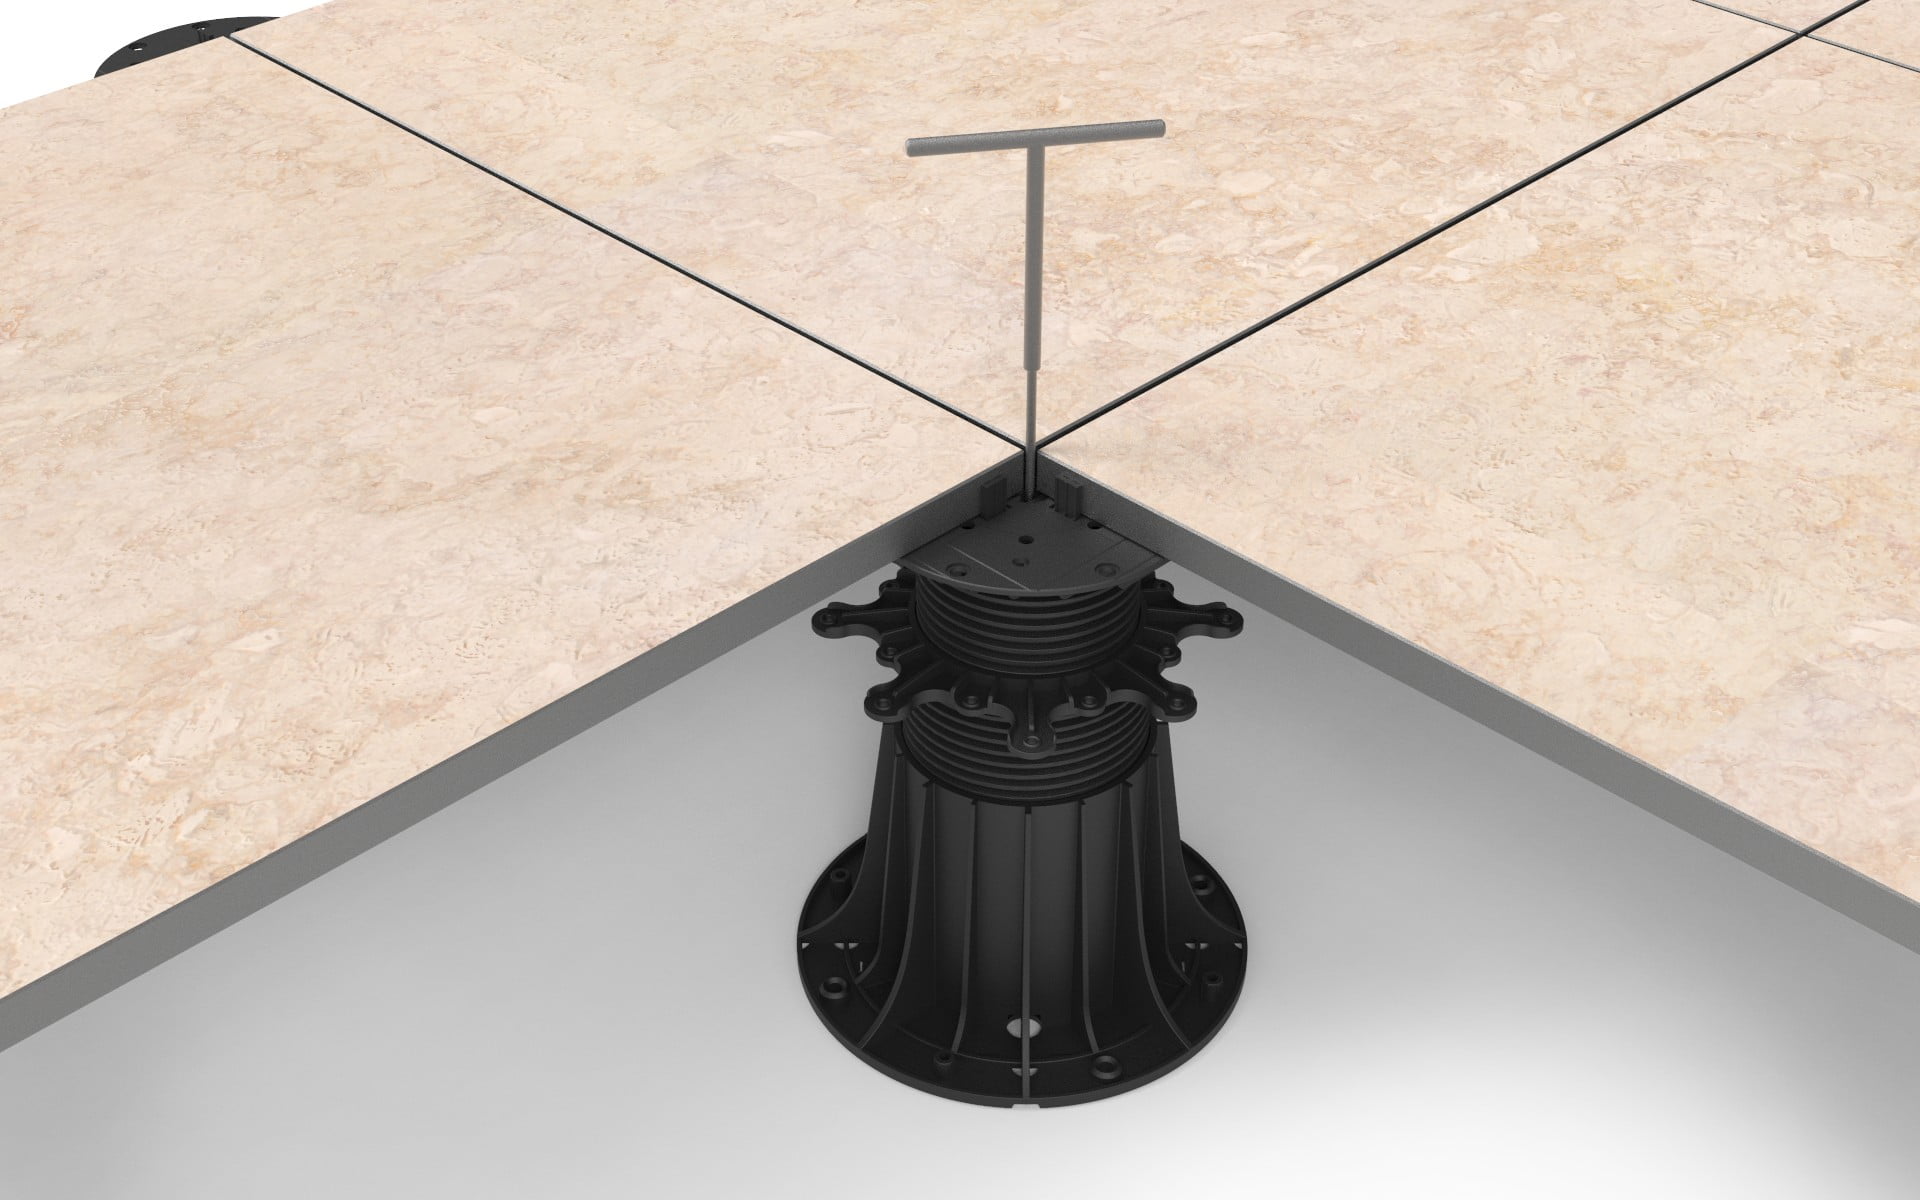 height adjustment of the tiles on the adjustable pedestals after the terrace is installed